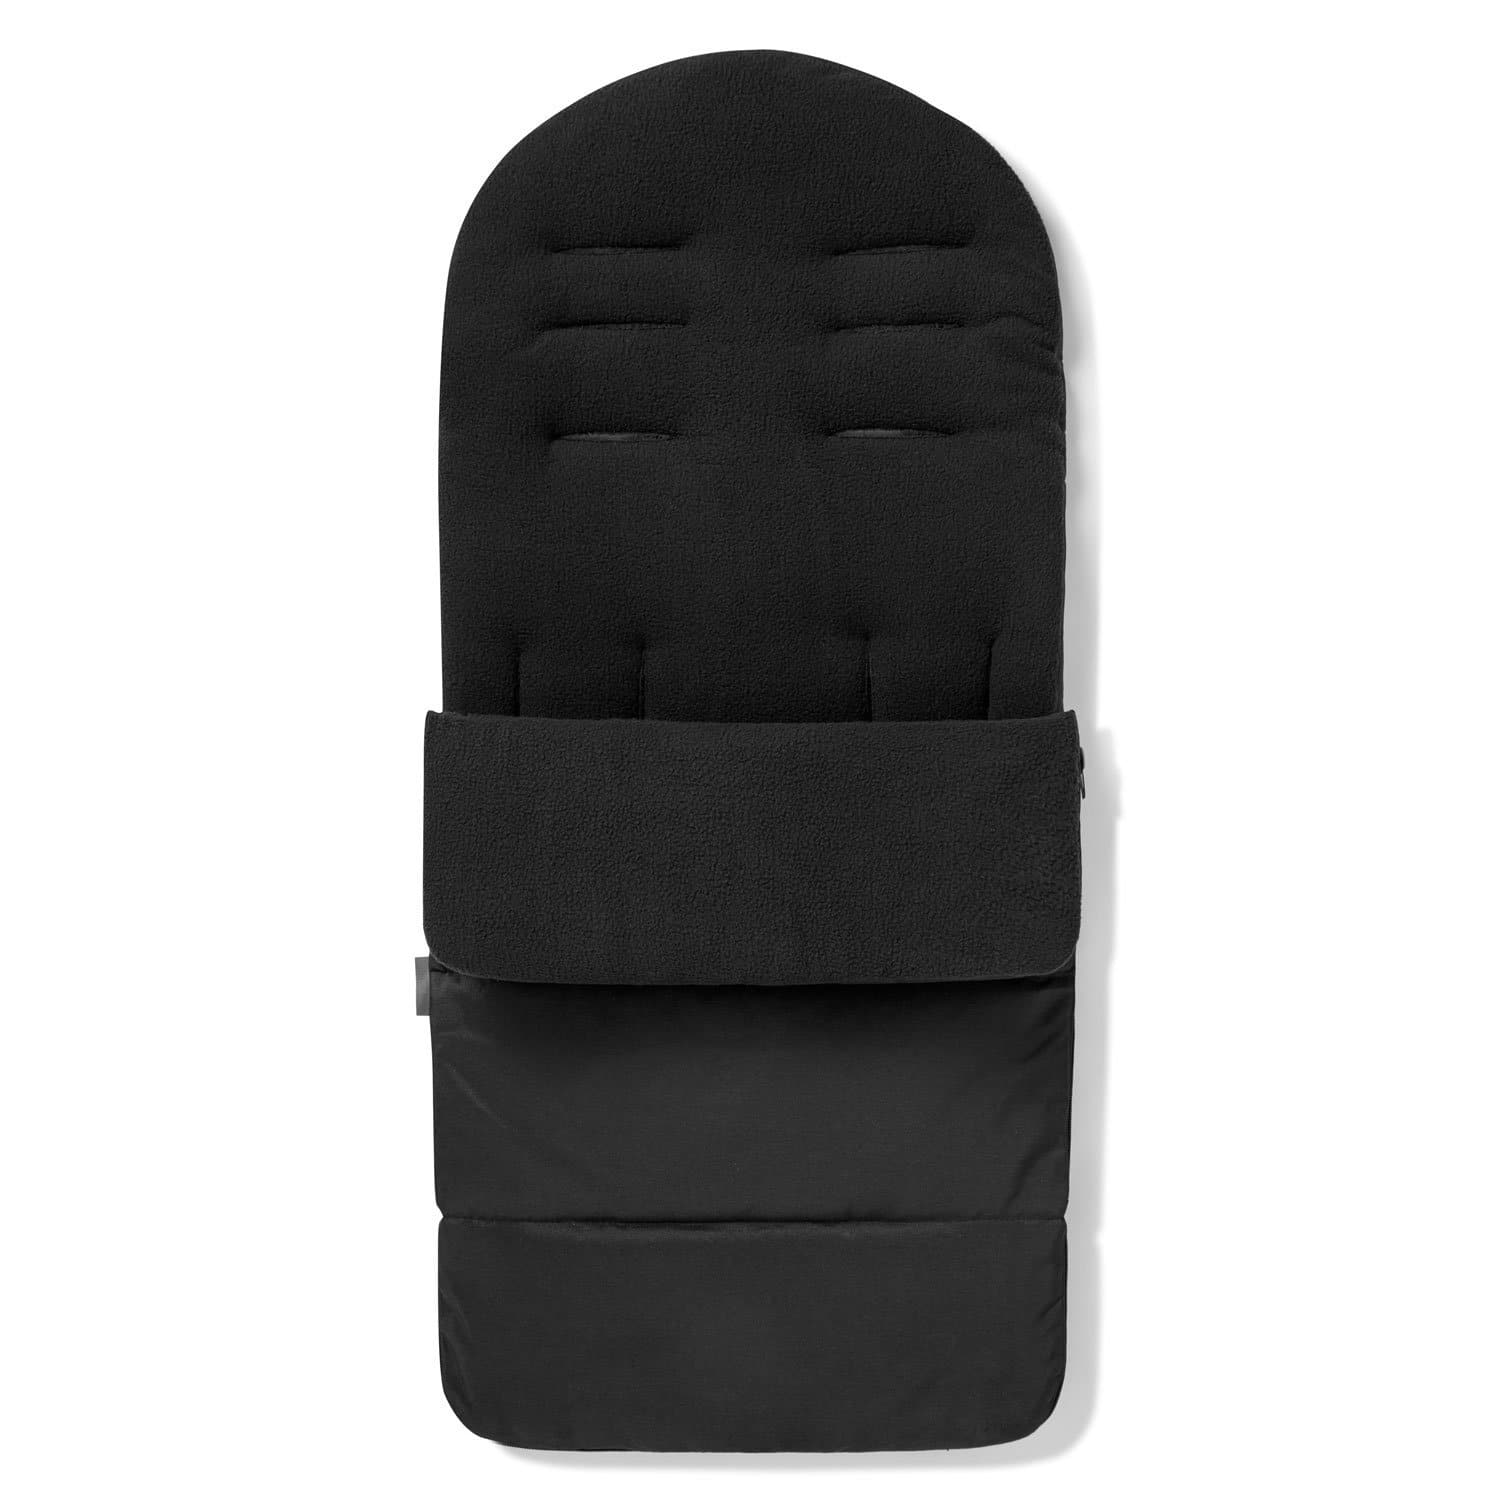 Premium Footmuff / Cosy Toes Compatible with Bumbleride - Black Jack / Fits All Models | For Your Little One